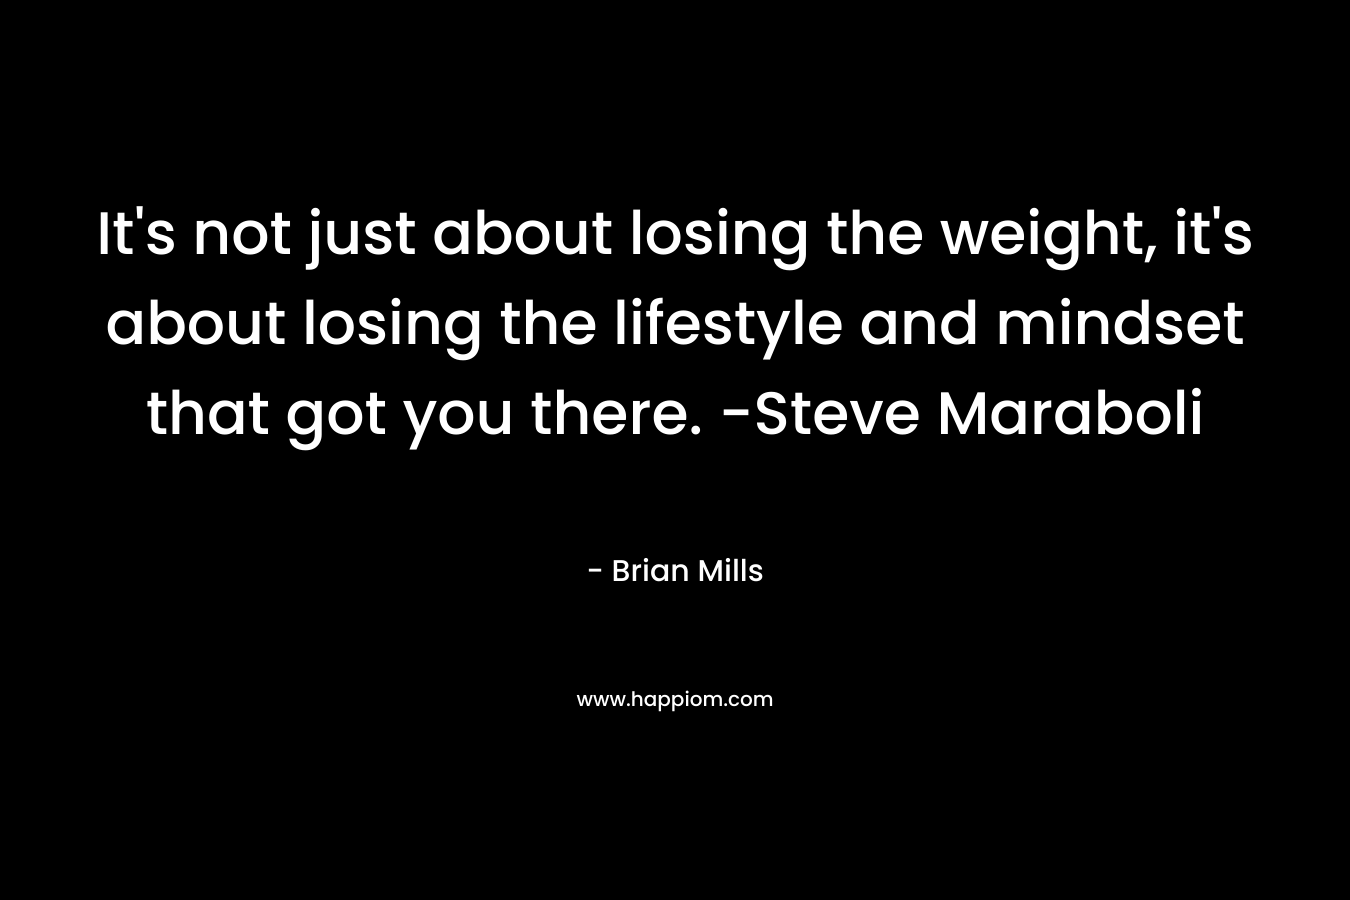 It's not just about losing the weight, it's about losing the lifestyle and mindset that got you there. -Steve Maraboli